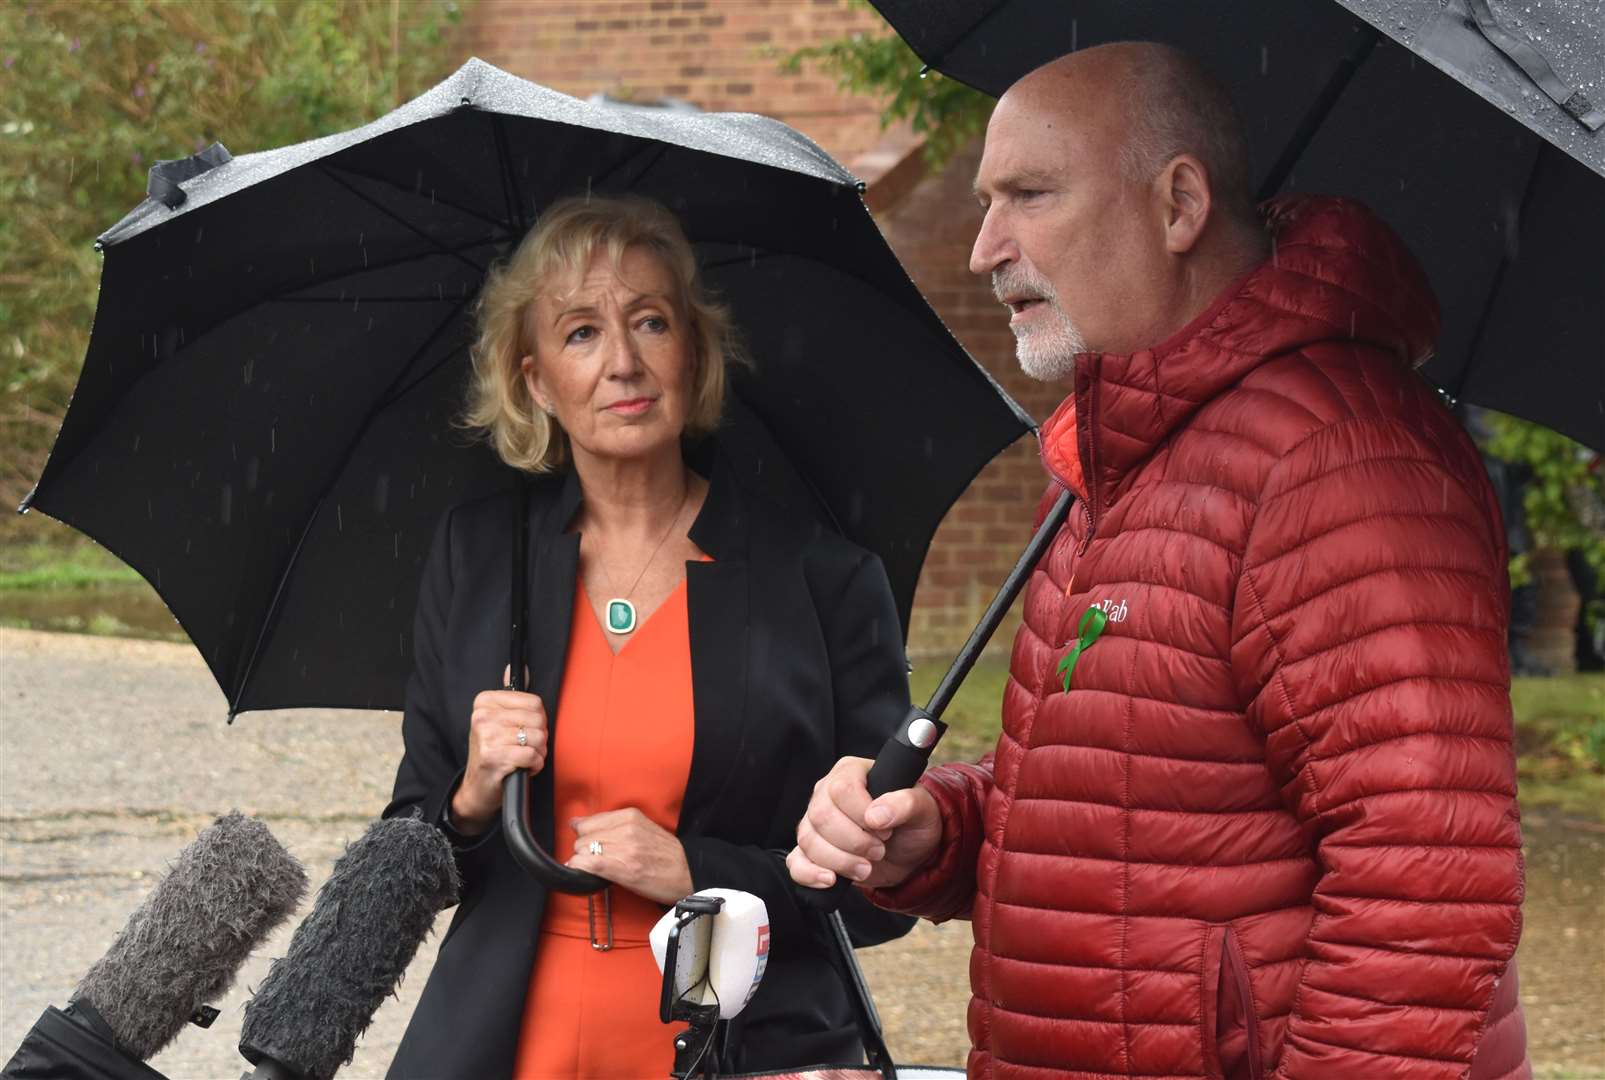 Andrea Leadsom MP and Harry Dunn family spokesman Radd Seiger speak to the media in Brackley, Northamptonshire (Matthew Cooper/PA)